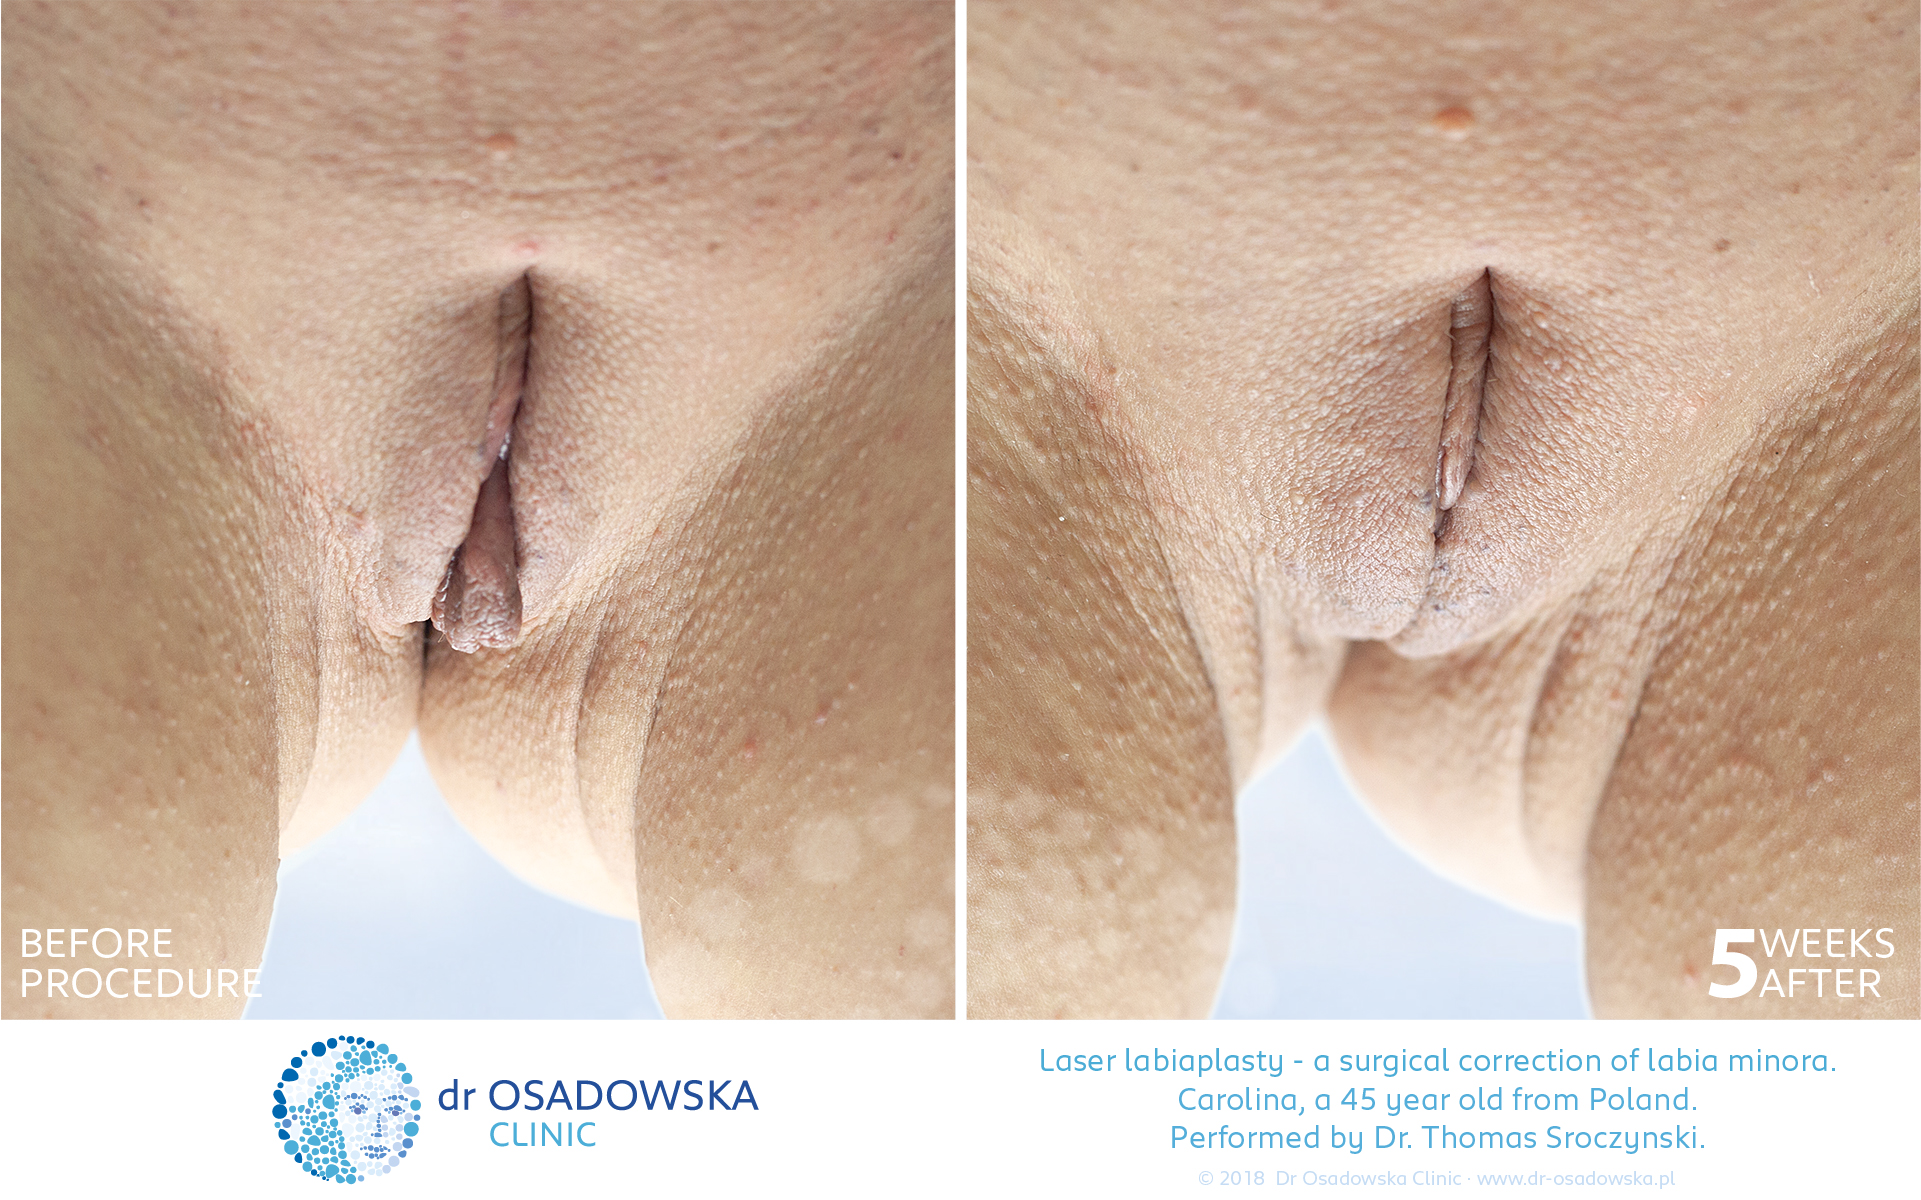 Laser Labiaplasty before and 5 weeks after. Carolina, 45 y.o. from Poland. View C